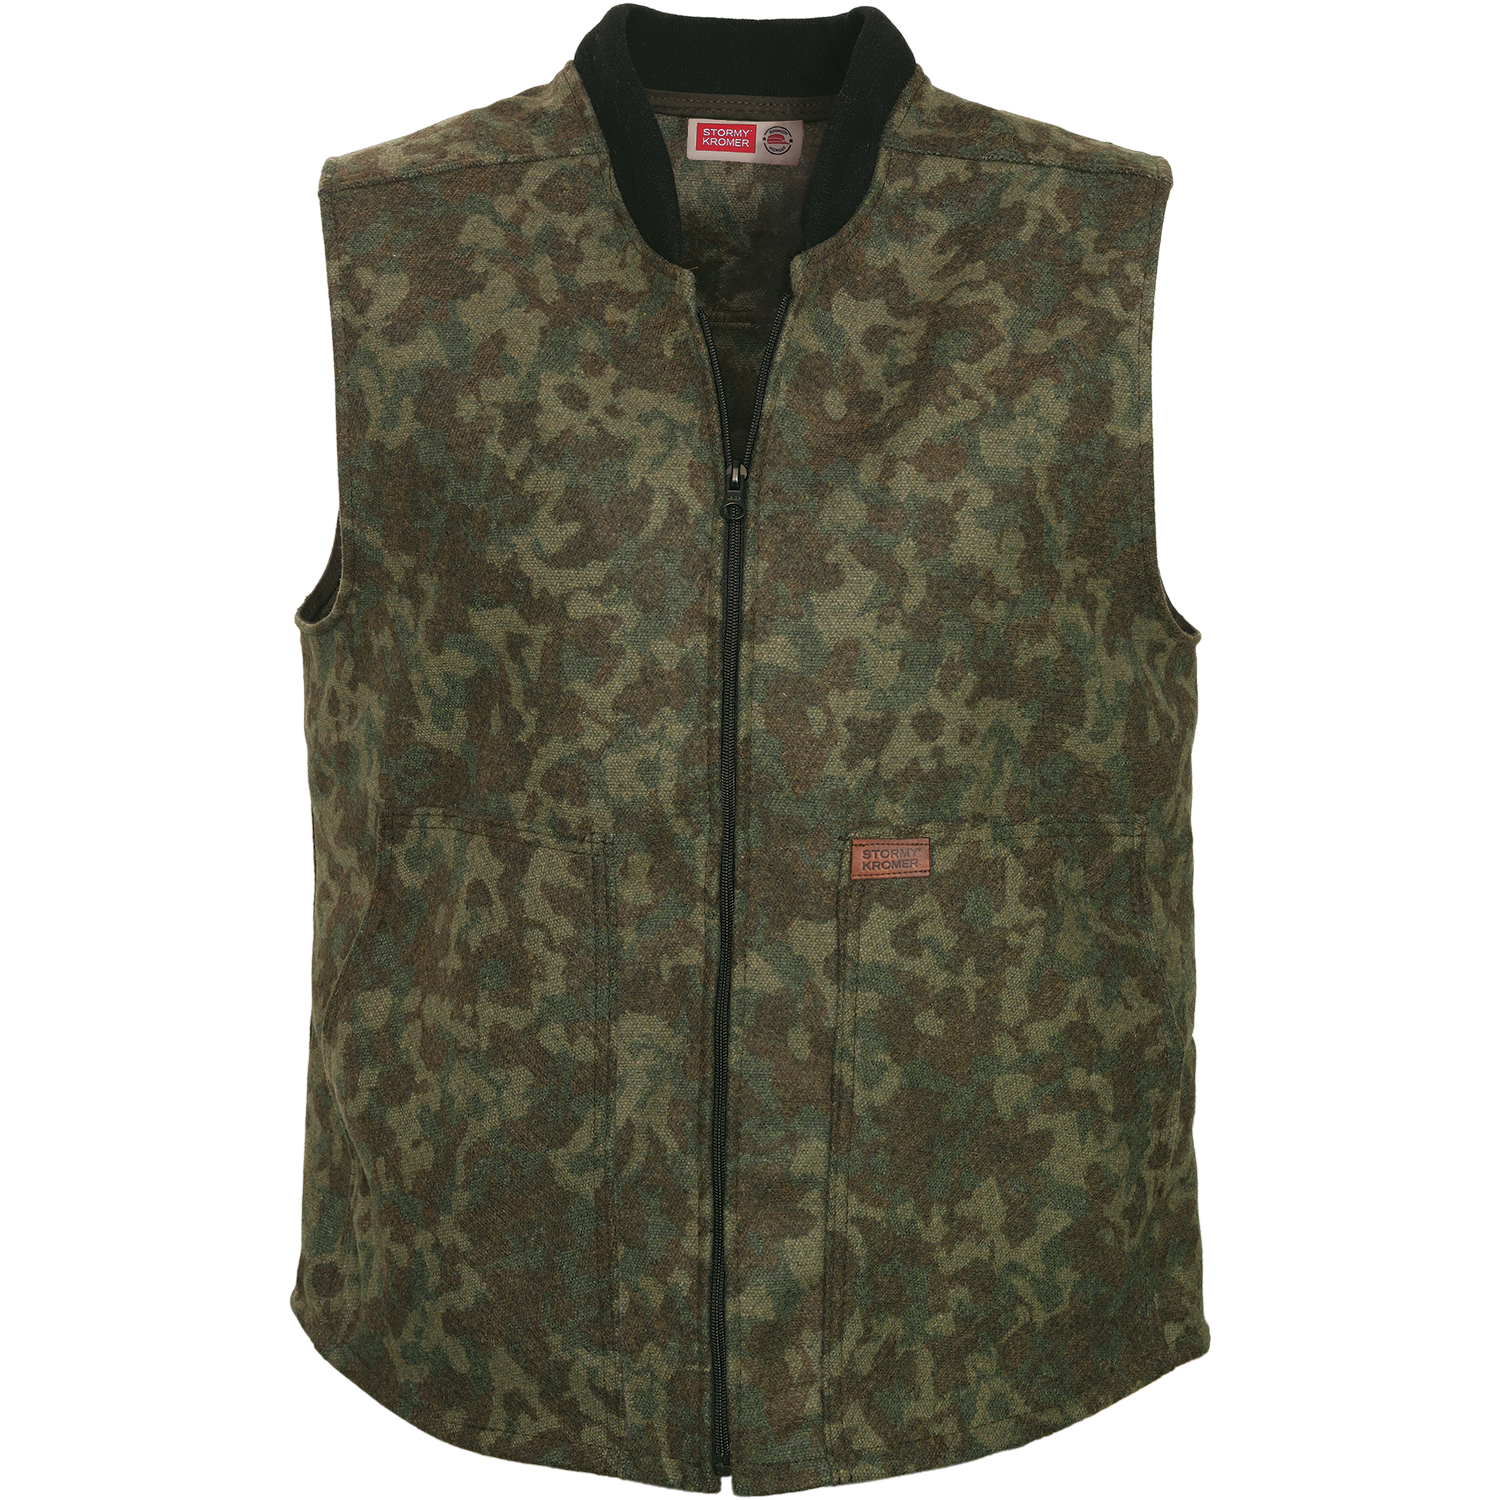 Picture of Stormy Kromer 56410 Yard Vest